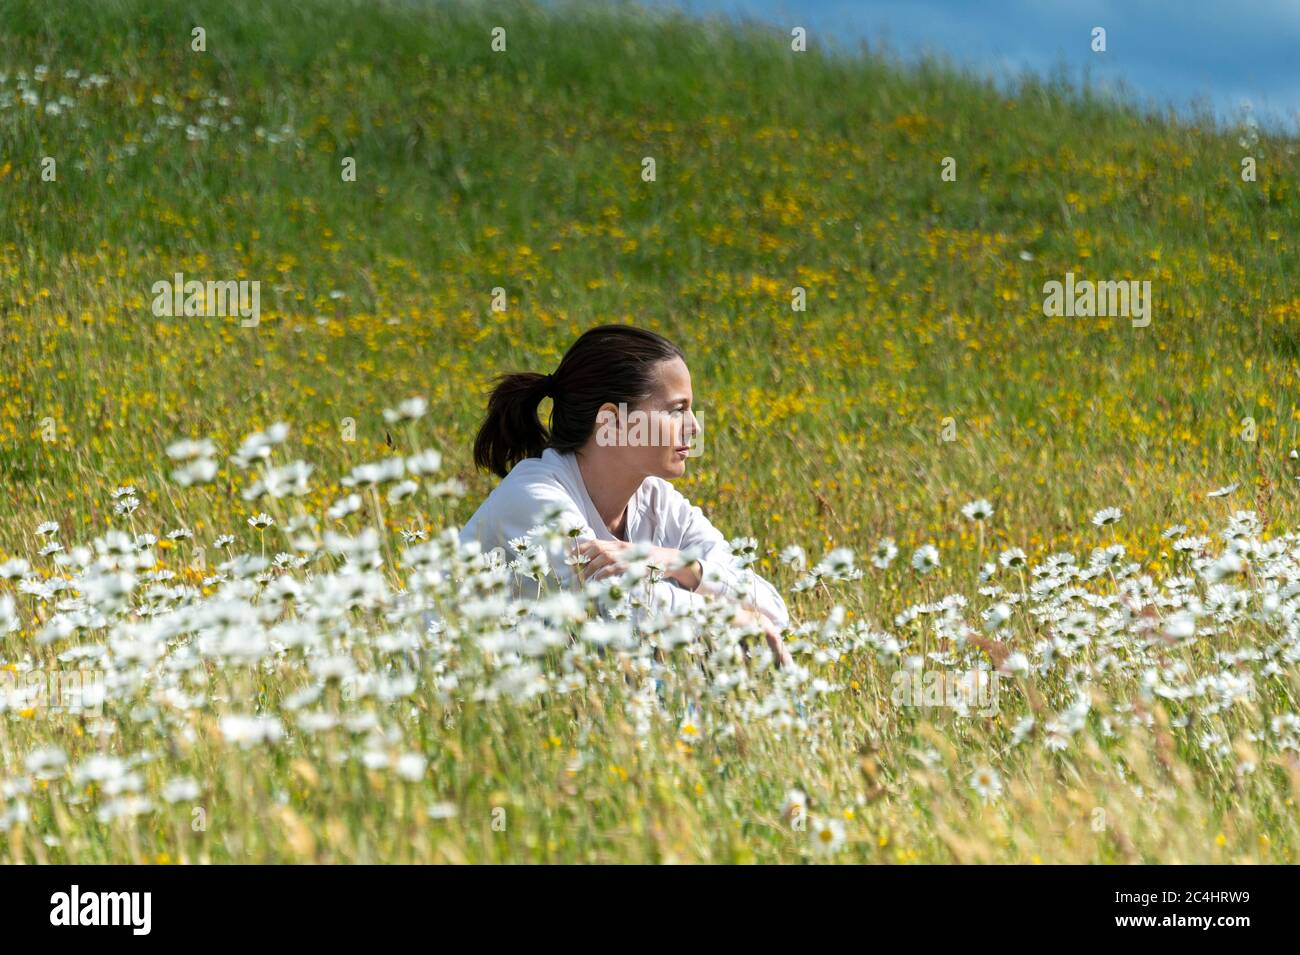 woman sitting in a field of daisies. Stock Photo